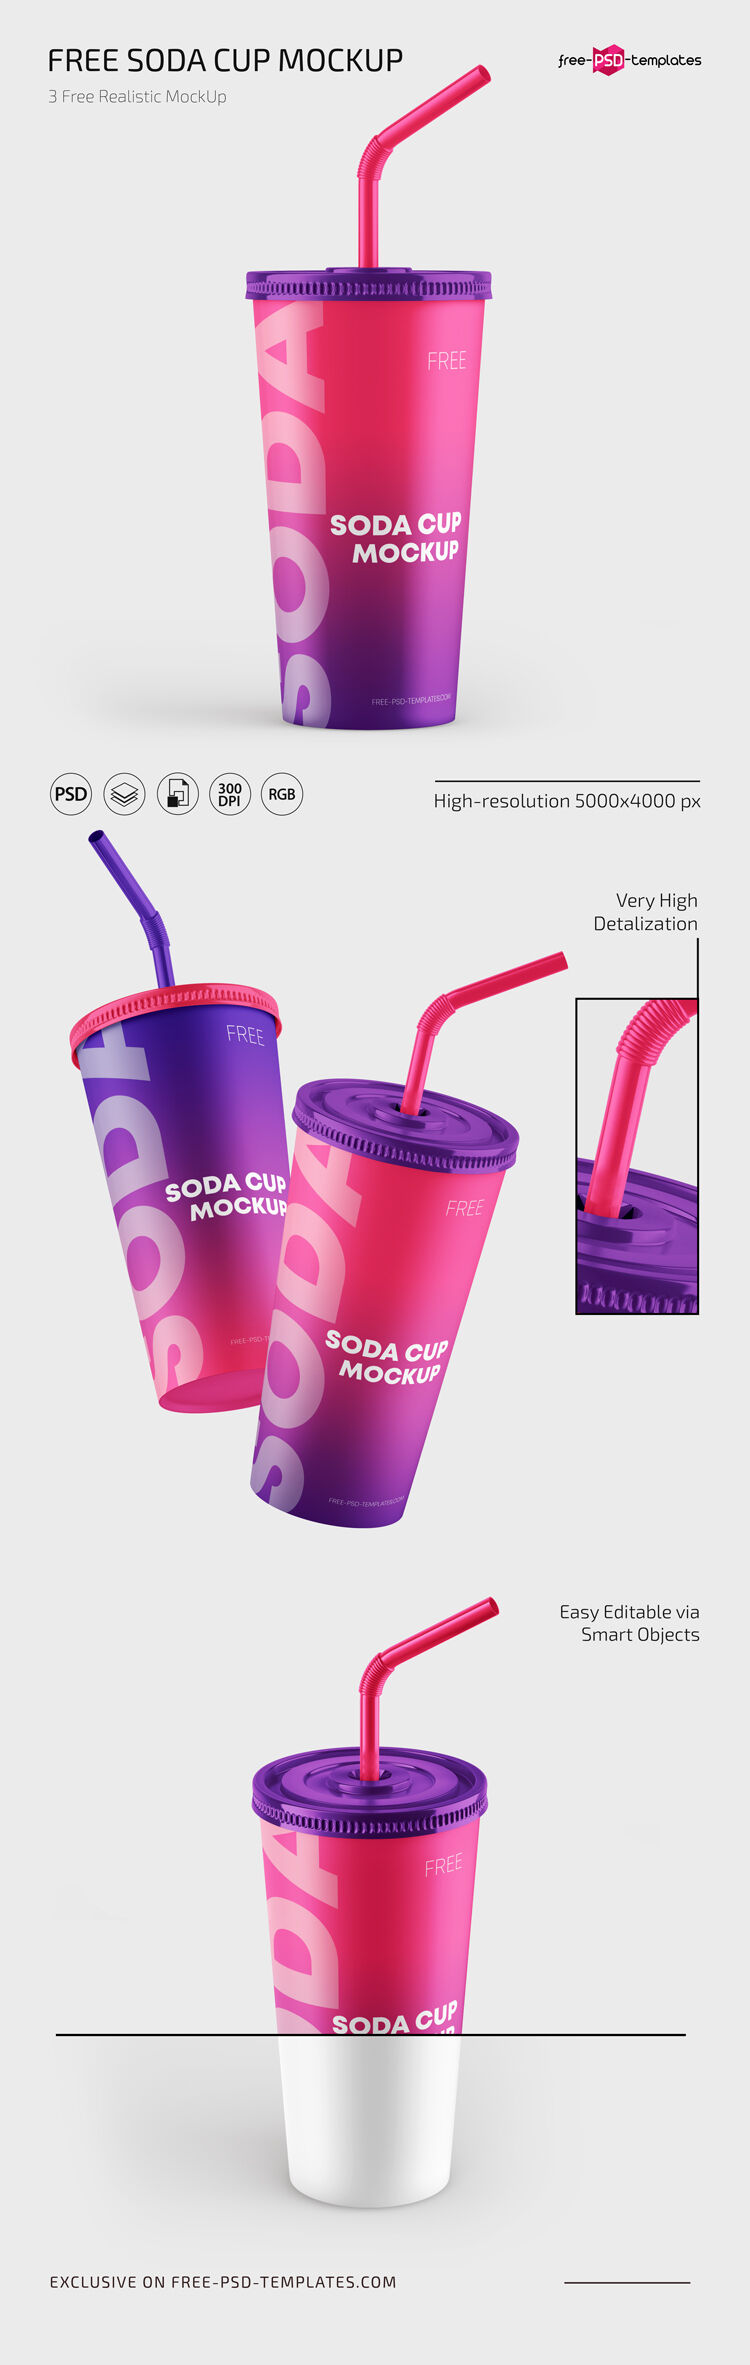 https://resourceboy.com/wp-content/uploads/2022/03/3-mockups-of-paper-soda-cup-and-straws.jpg